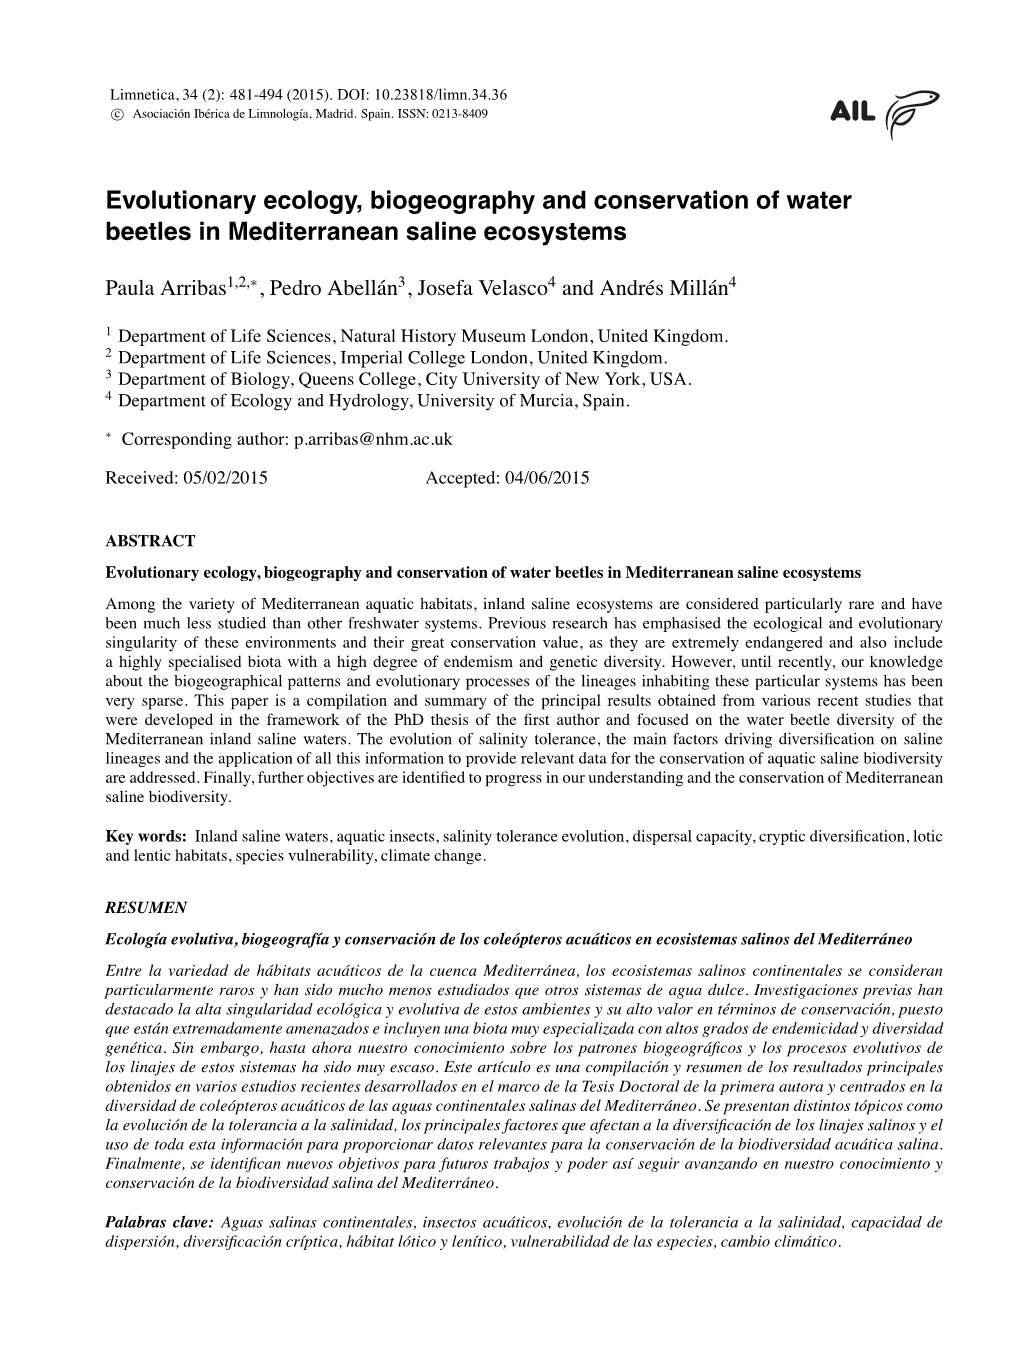 Evolutionary Ecology, Biogeography and Conservation of Water Beetles in Mediterranean Saline Ecosystems